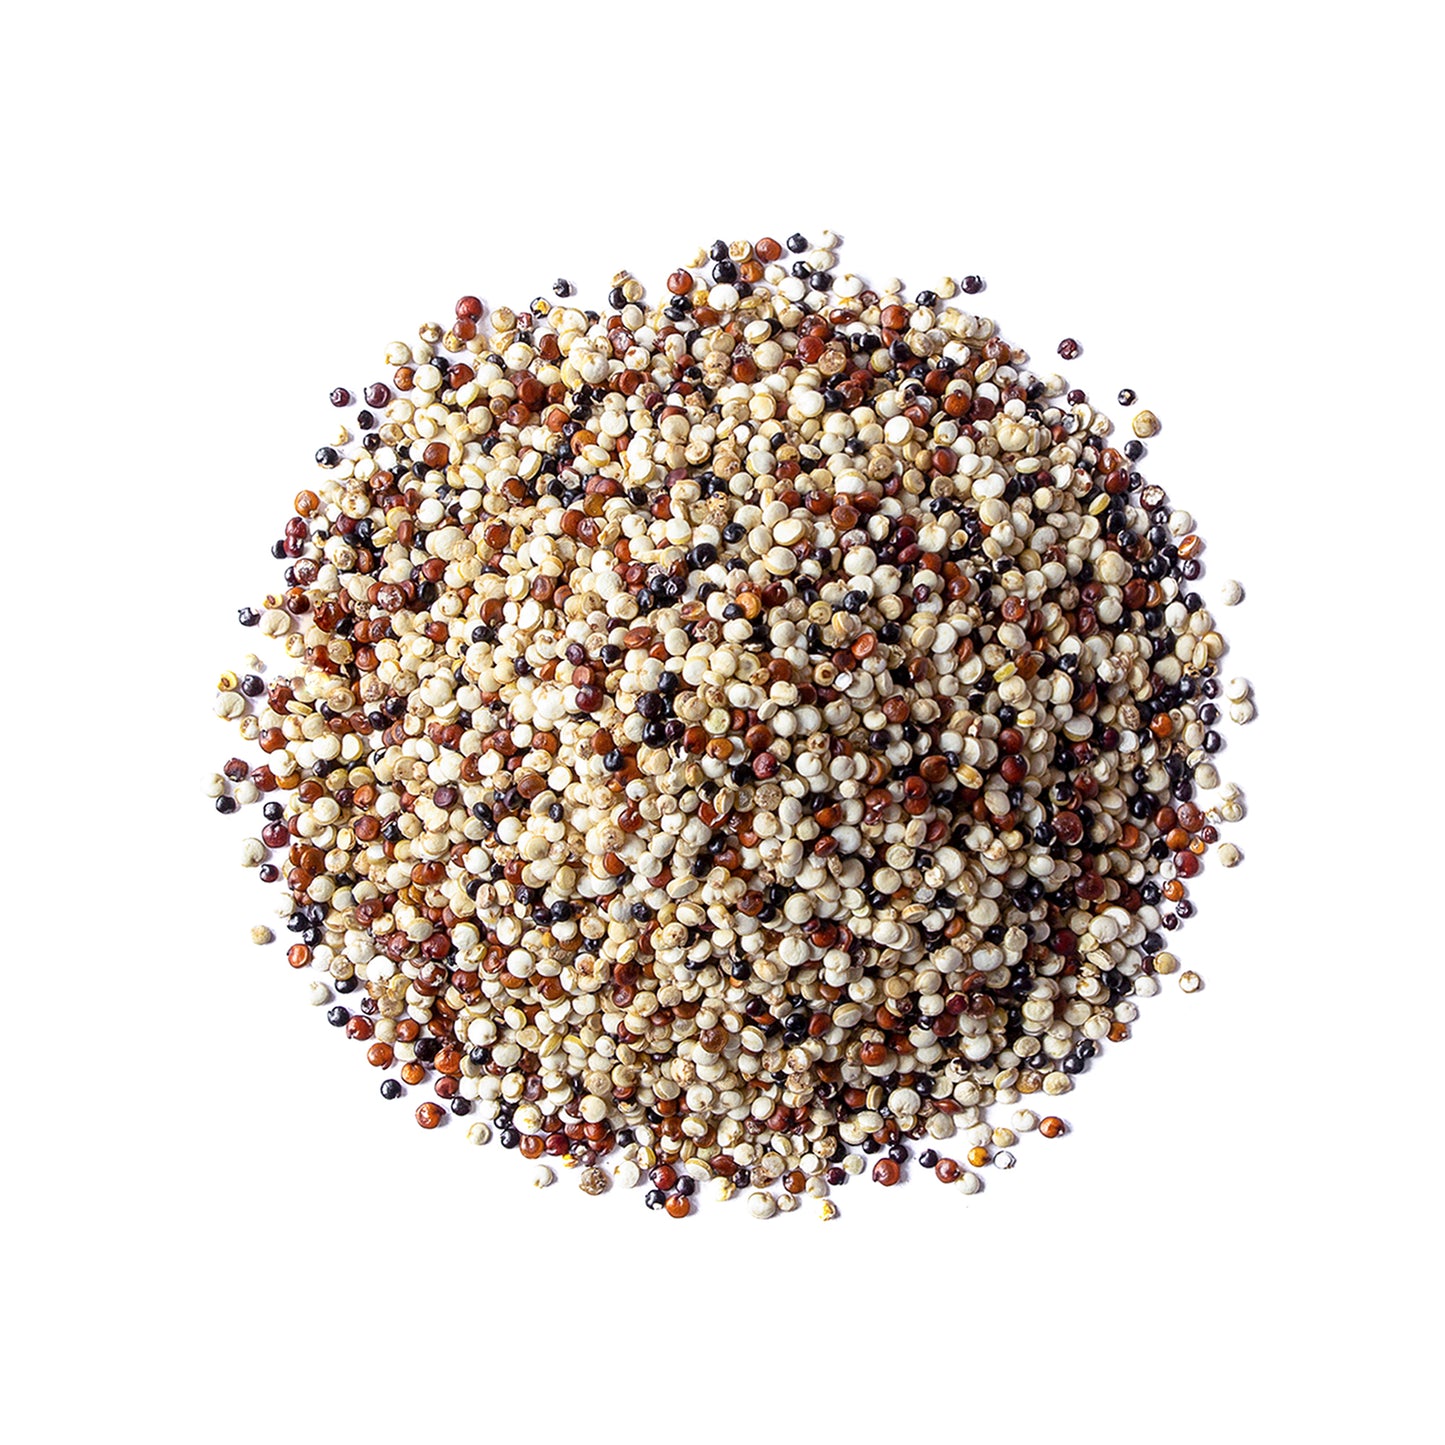 Tri-Color Quinoa Grain – Premium Blend of White, Black, and Red Whole Seeds. Pre-Washed and Ready to Cook. A Nutrient-Rich Superfood in Bulk. Good Source of Fiber and Protein. Kosher